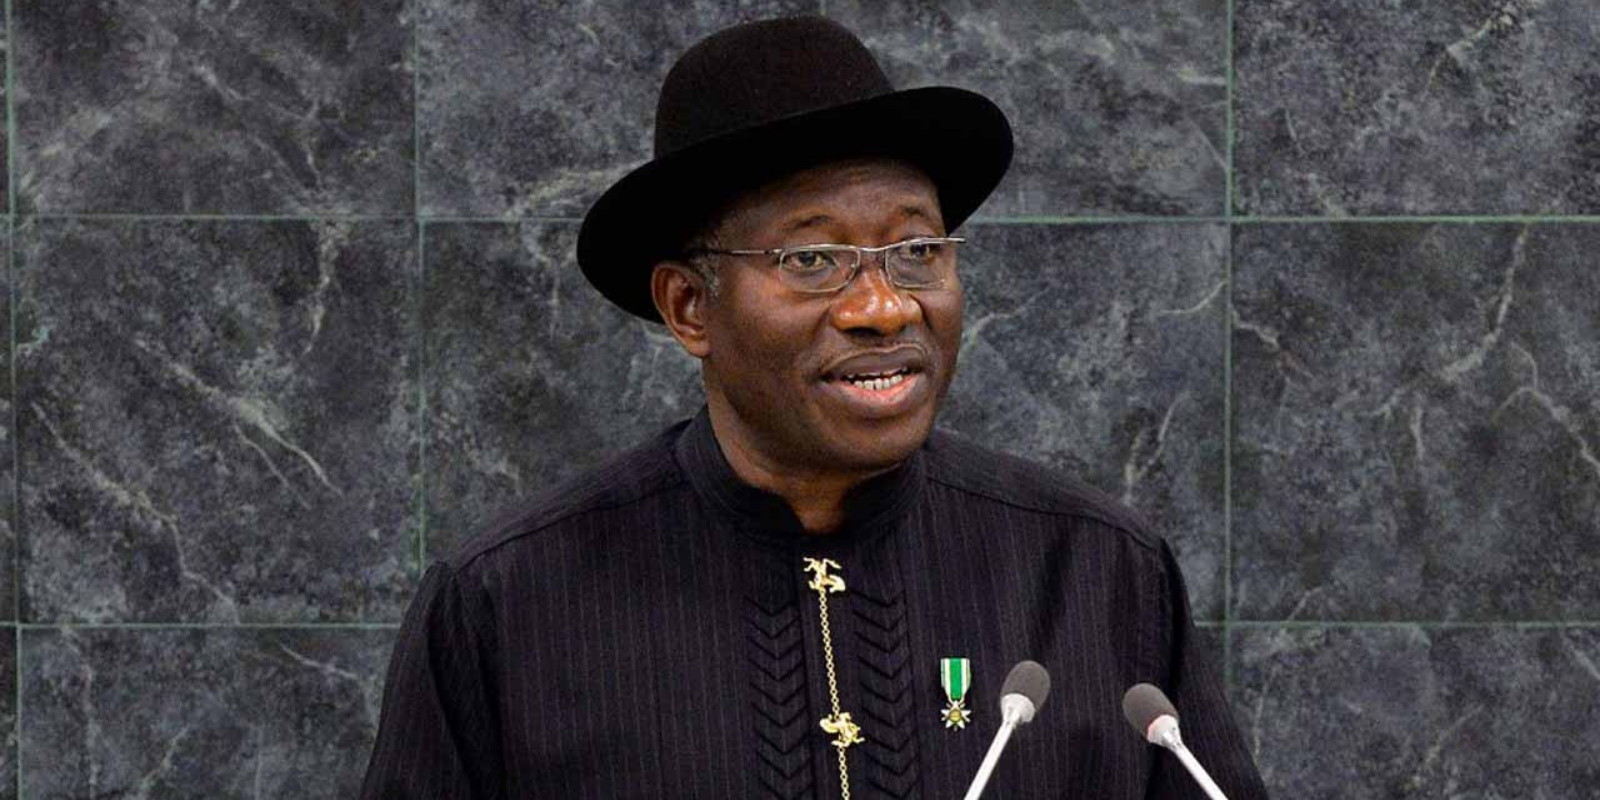 Goodluck Jonathan was the governor of which state?